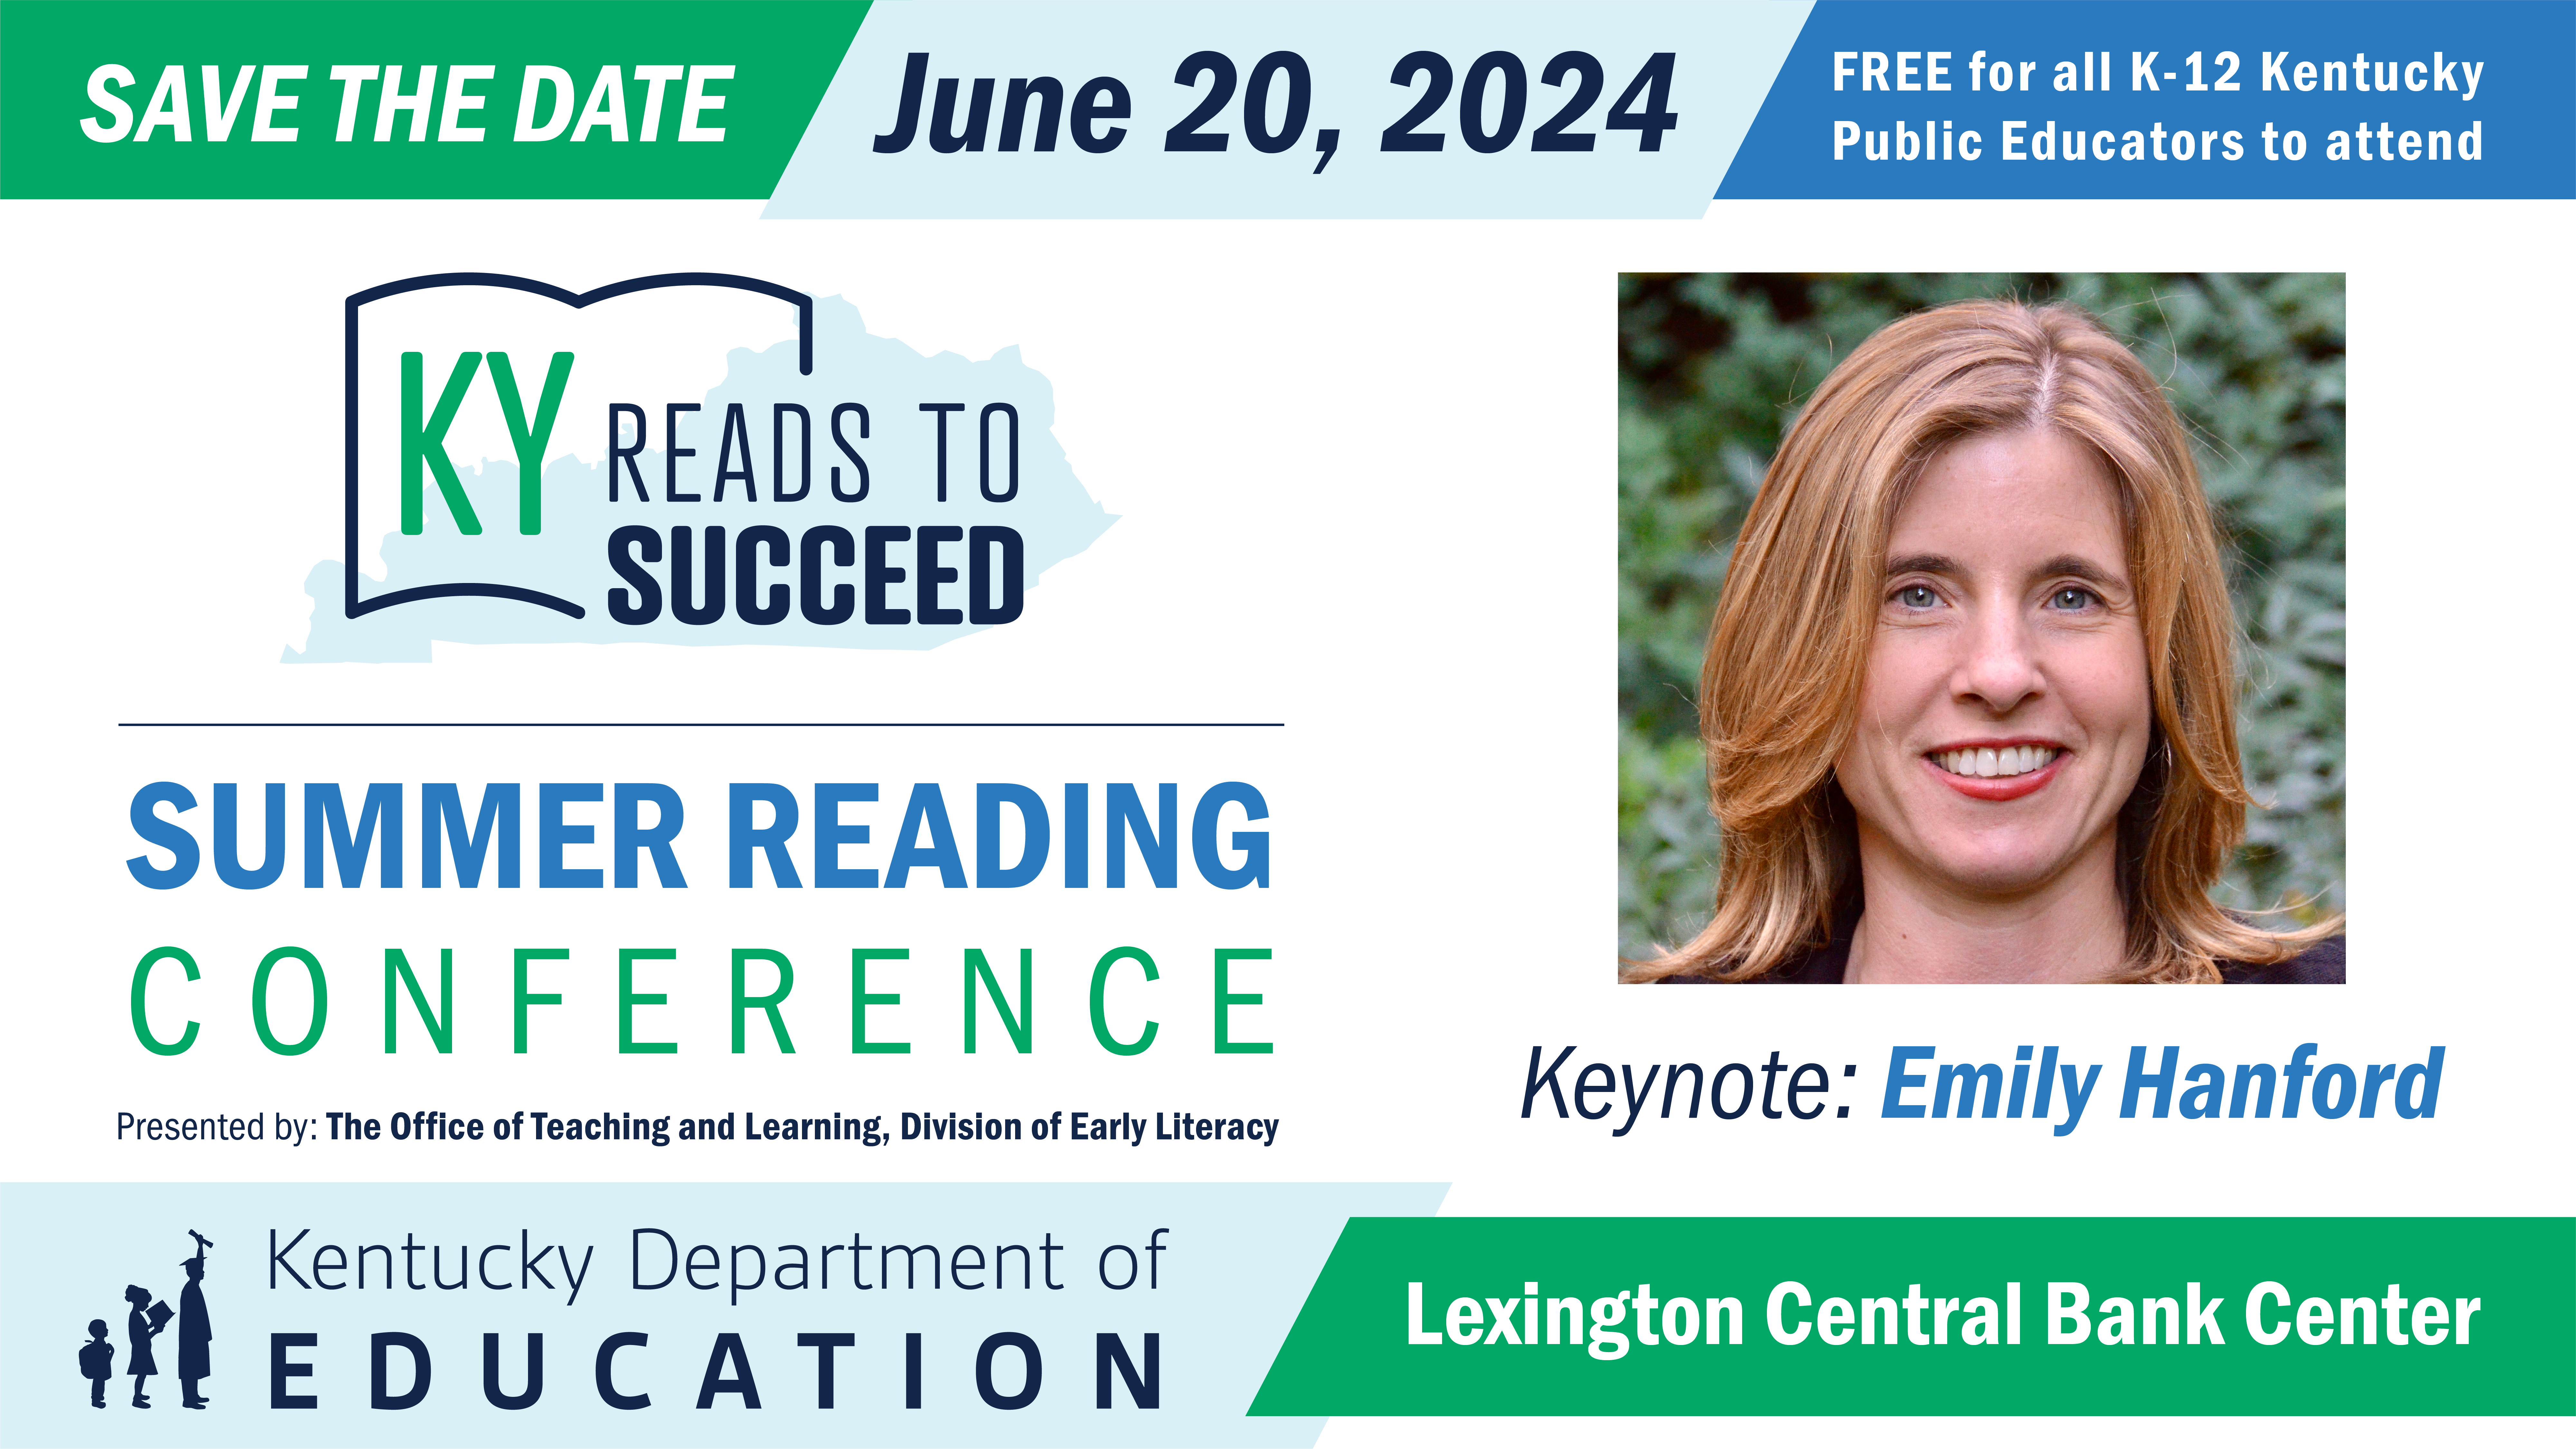 Save the Date: KY Reads to Succeed Summer Conference June 20, 2024 Lexington Central Bank. Keynote Emily Hanford